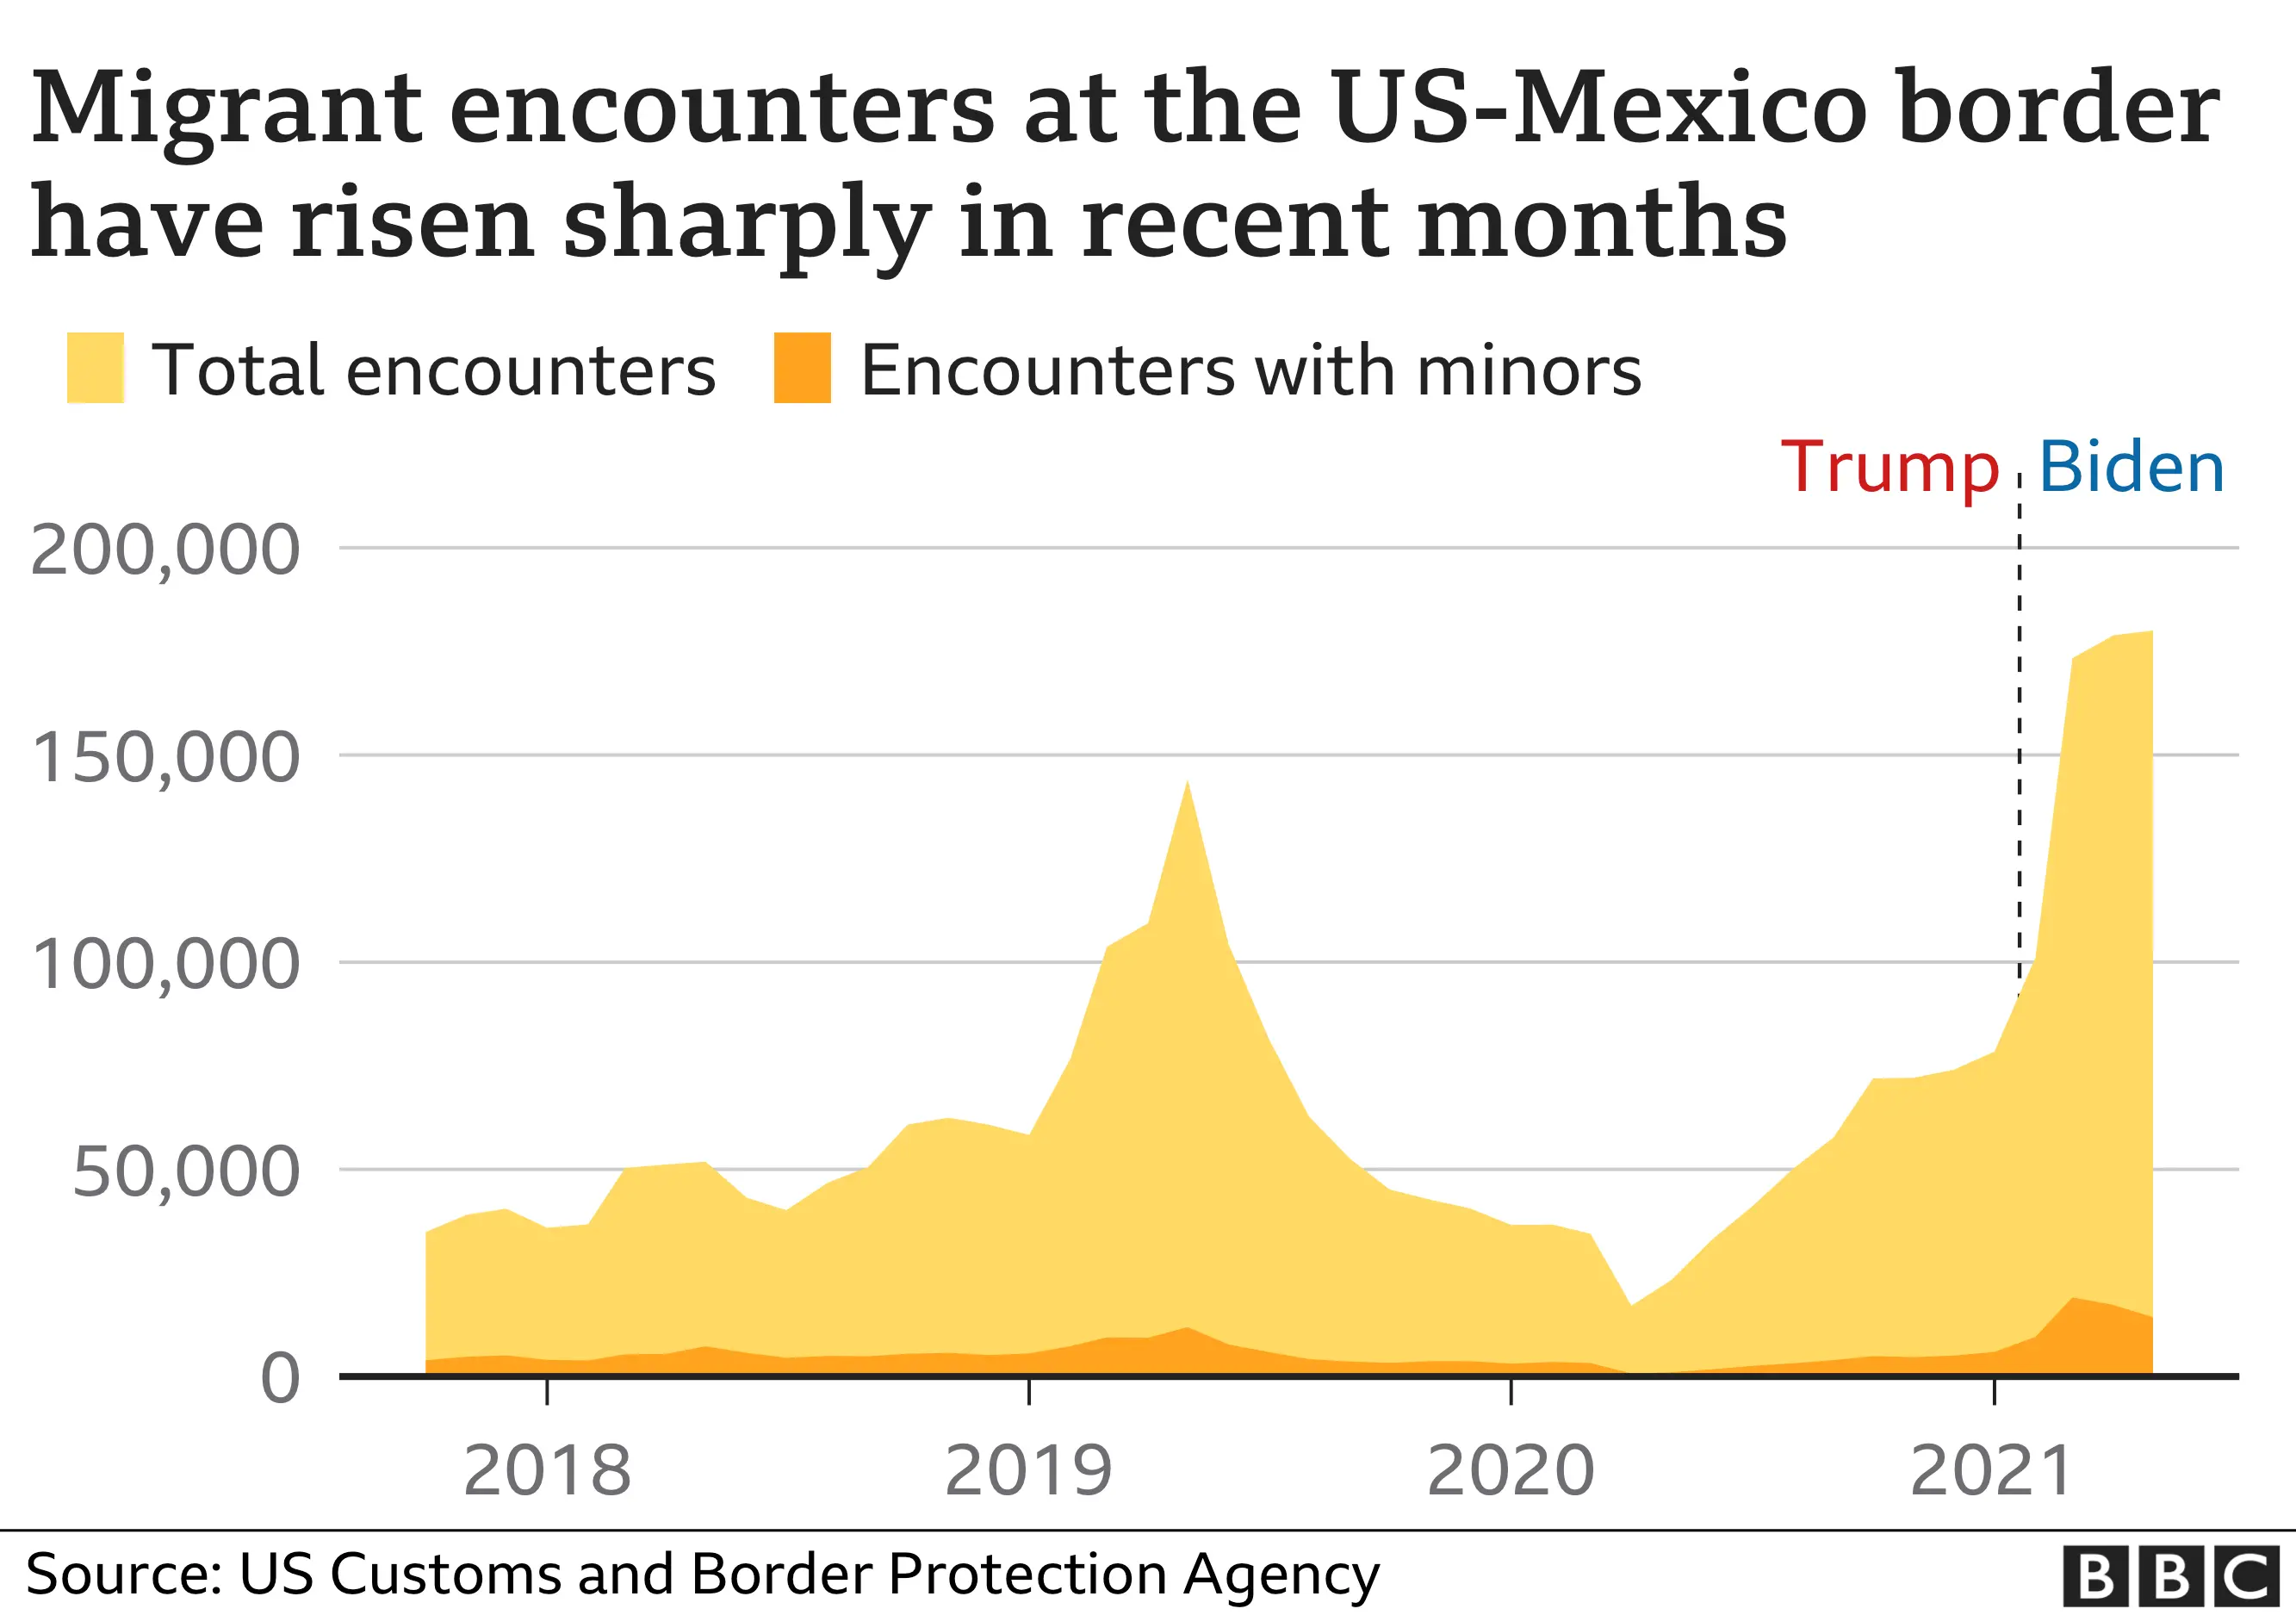 Immigration Is USMexico border seeing a surge in migrants?